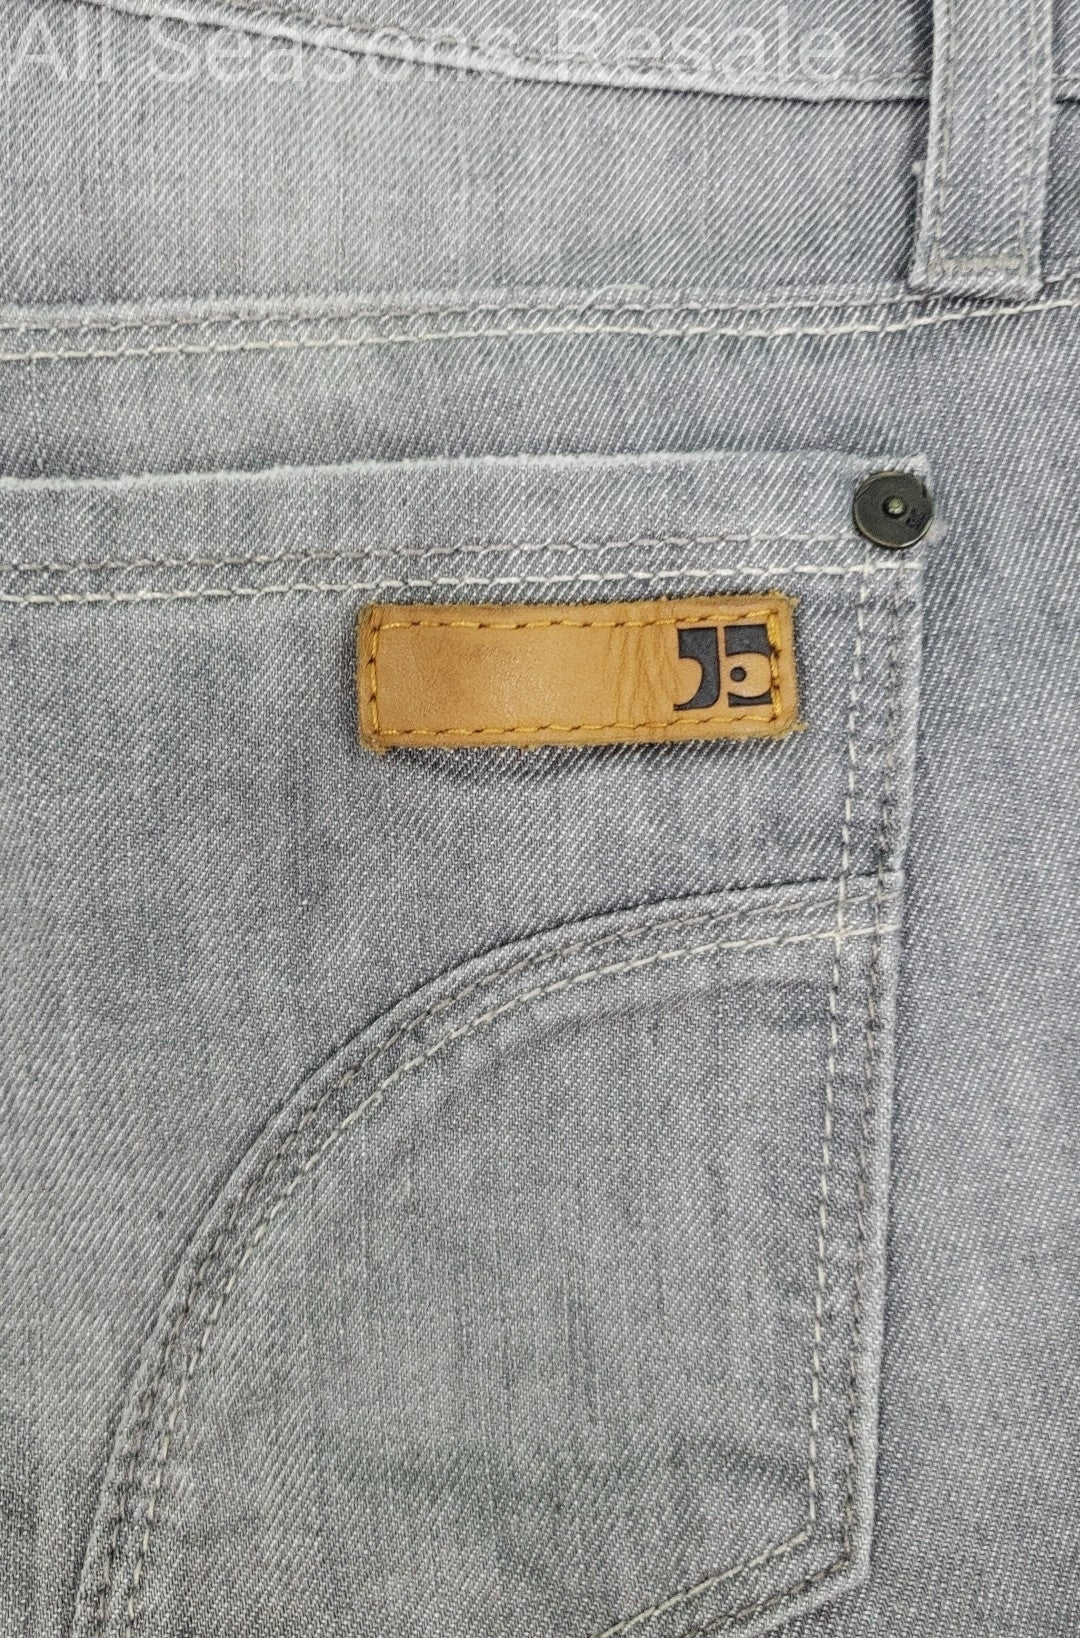 Joe's Jeans Size 29 Rolled Chelsea Fir Keira Grey Wash NWT 2H